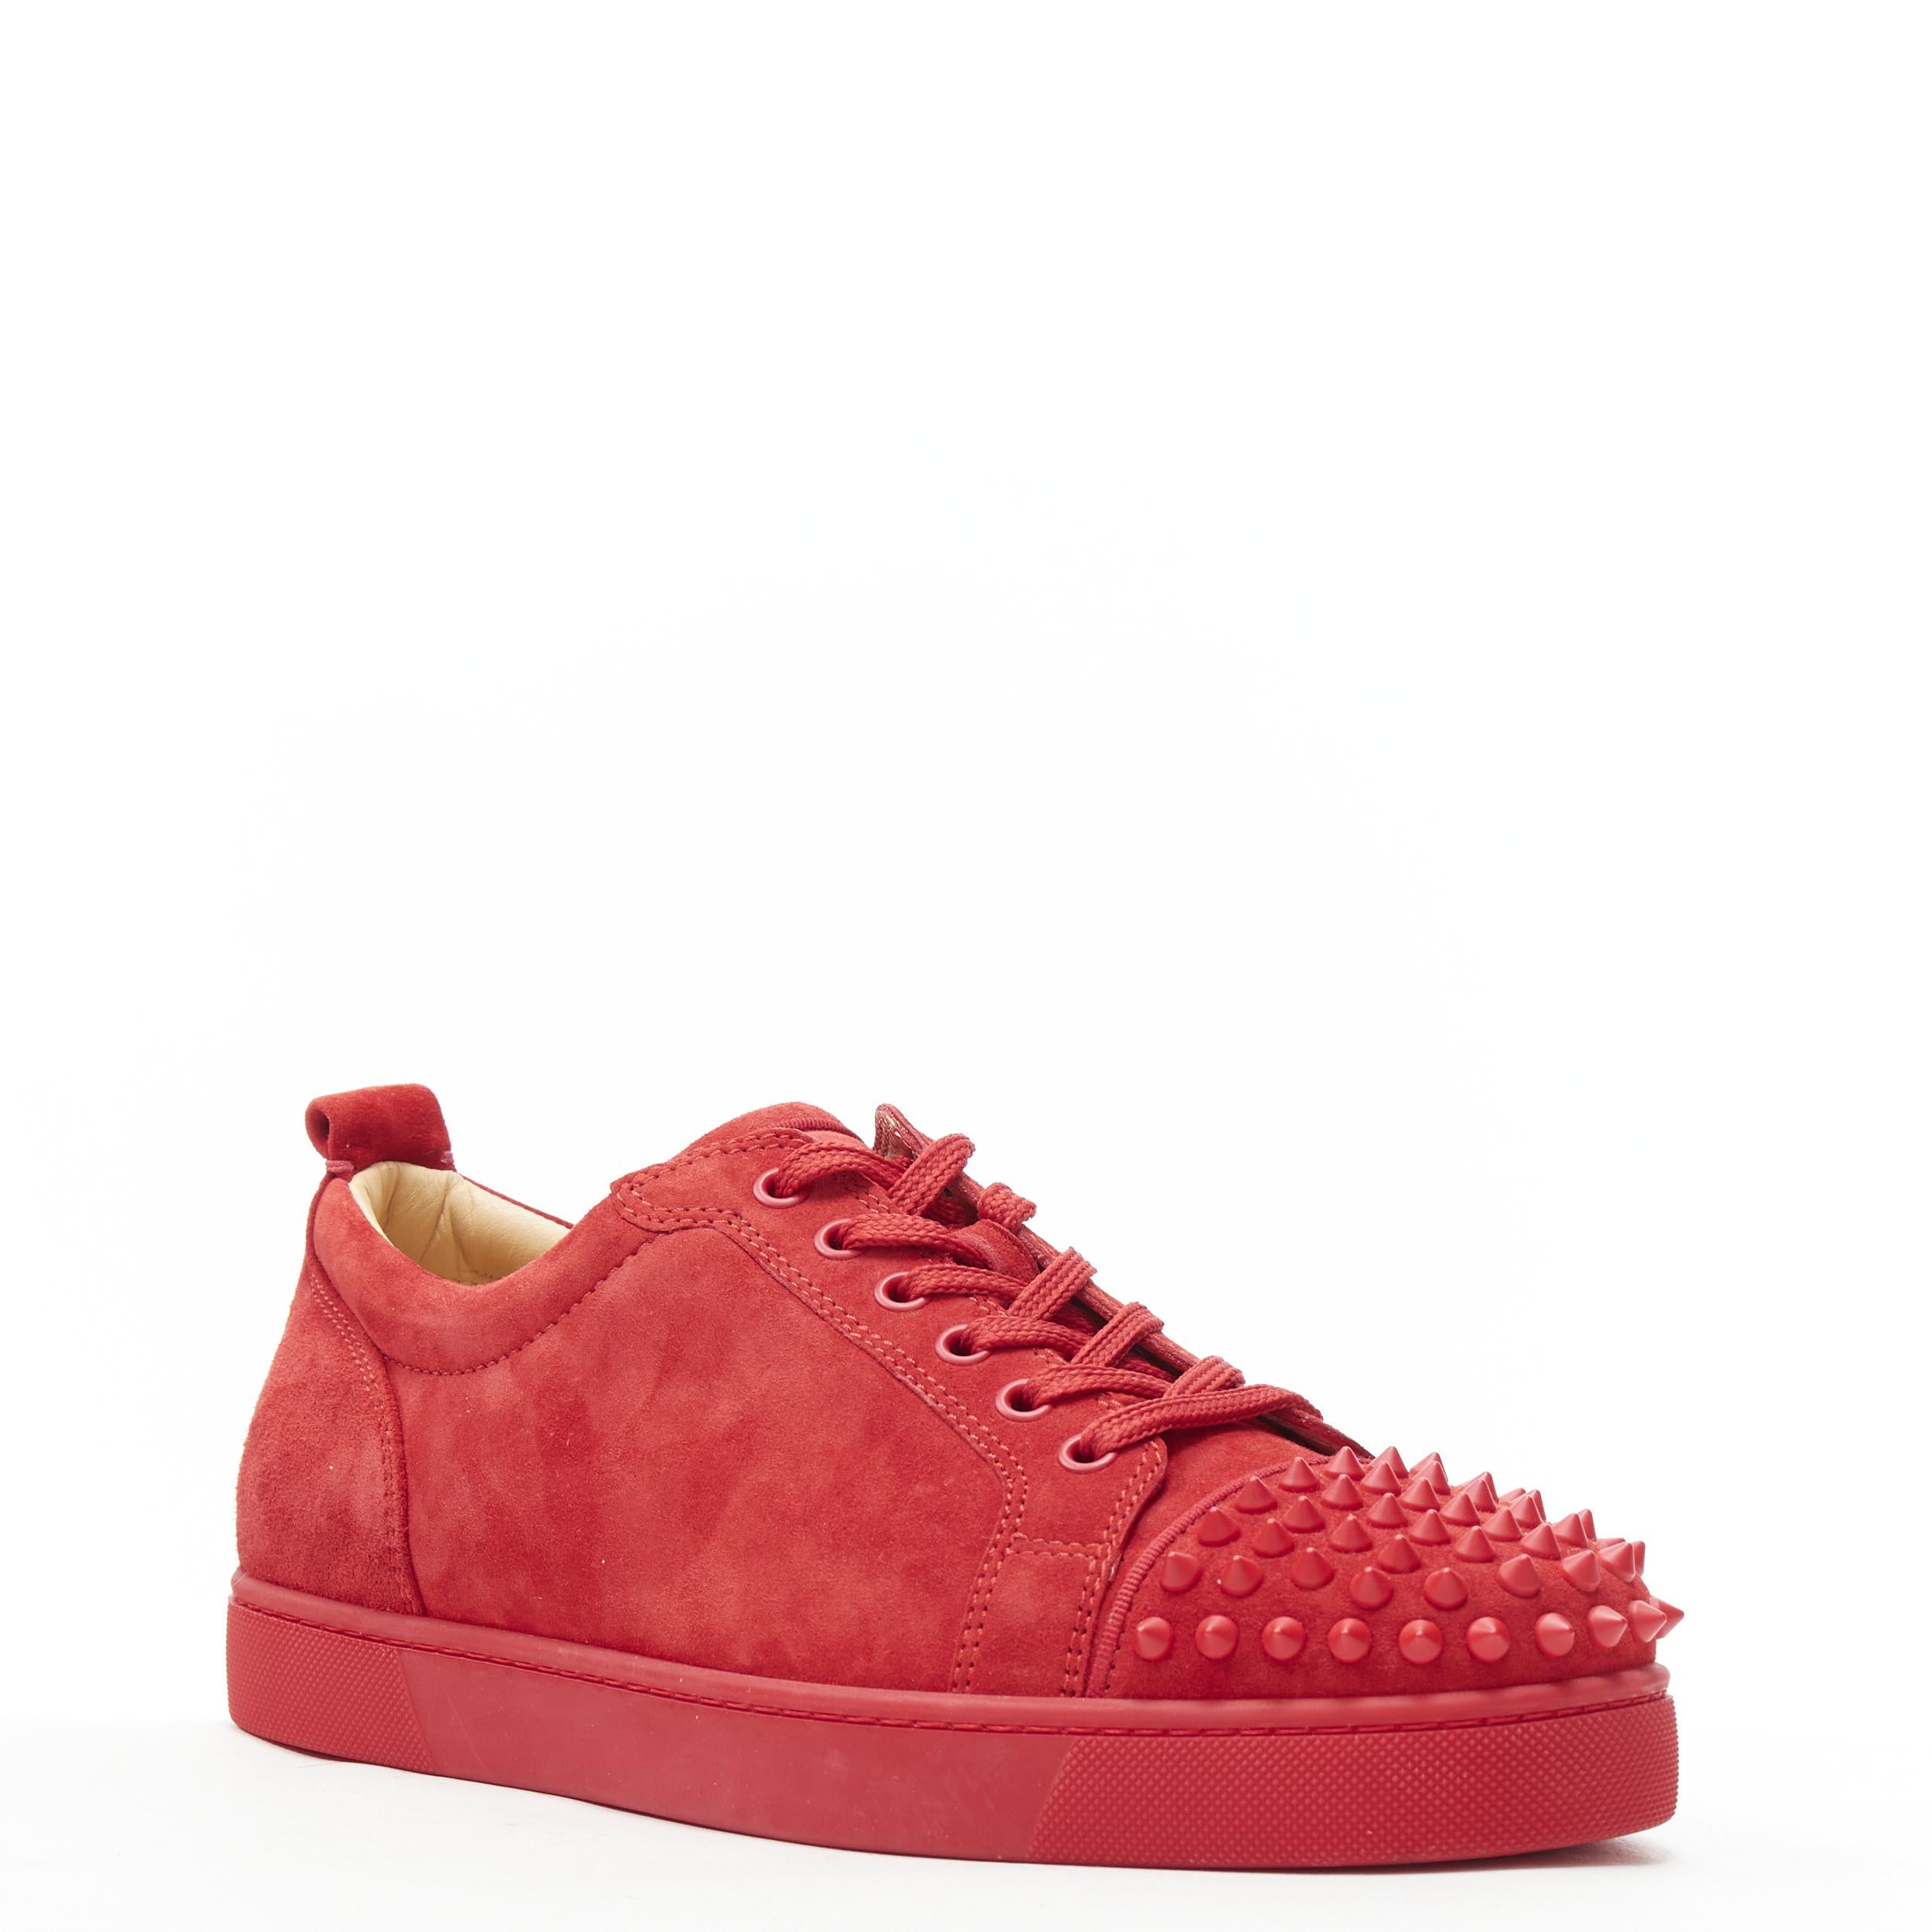 new CHRISTIAN LOUBOUTIN Louis Junior Spike red suede spike toe low sneaker EU42 
Reference: TGAS/B01075 
Brand: Christian Louboutin 
Designer: Christian Louboutin 
Model: Louis Junior Spike red suede 
Material: Suede 
Color: Red 
Pattern: Solid